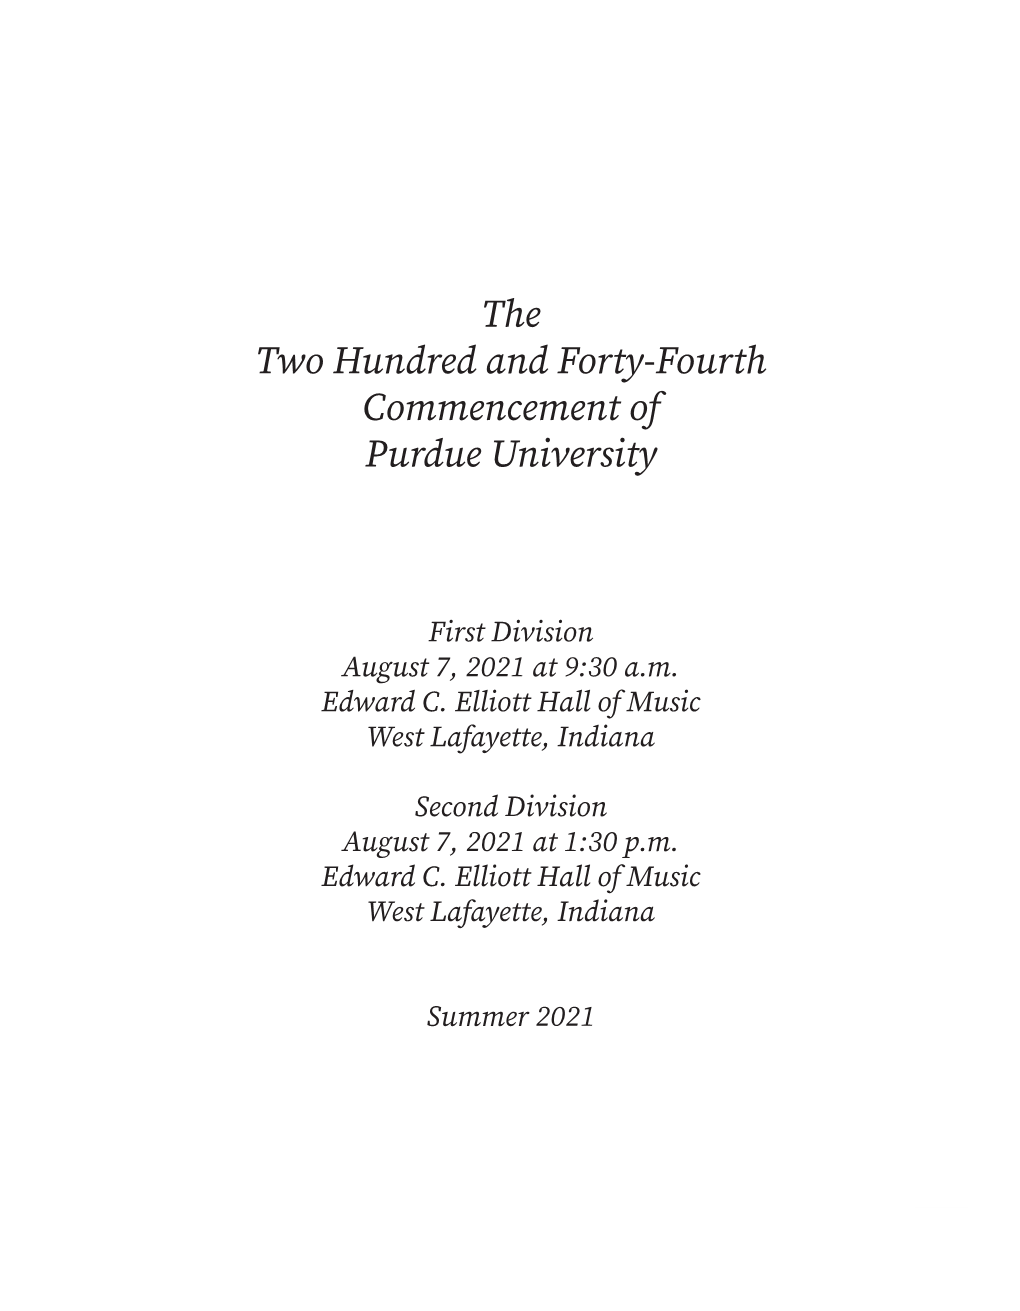 The Two Hundred and Forty-Fourth Commencement of Purdue University